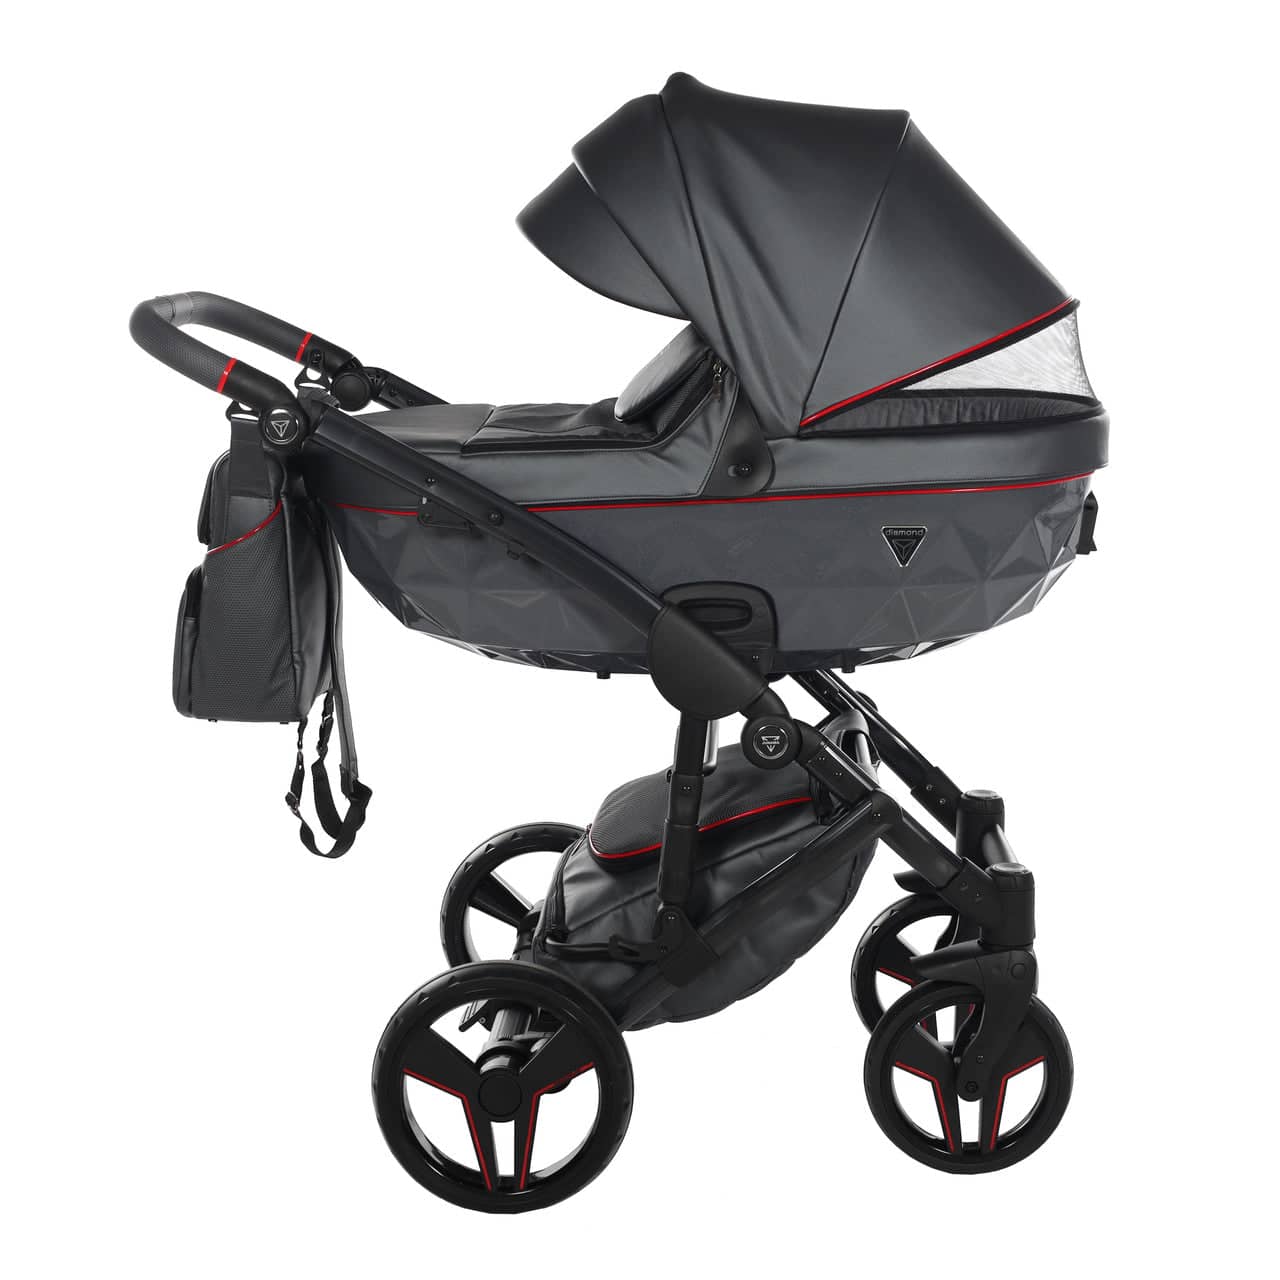 Junama S-Class 3 In 1 Travel System - Graphite - For Your Little One